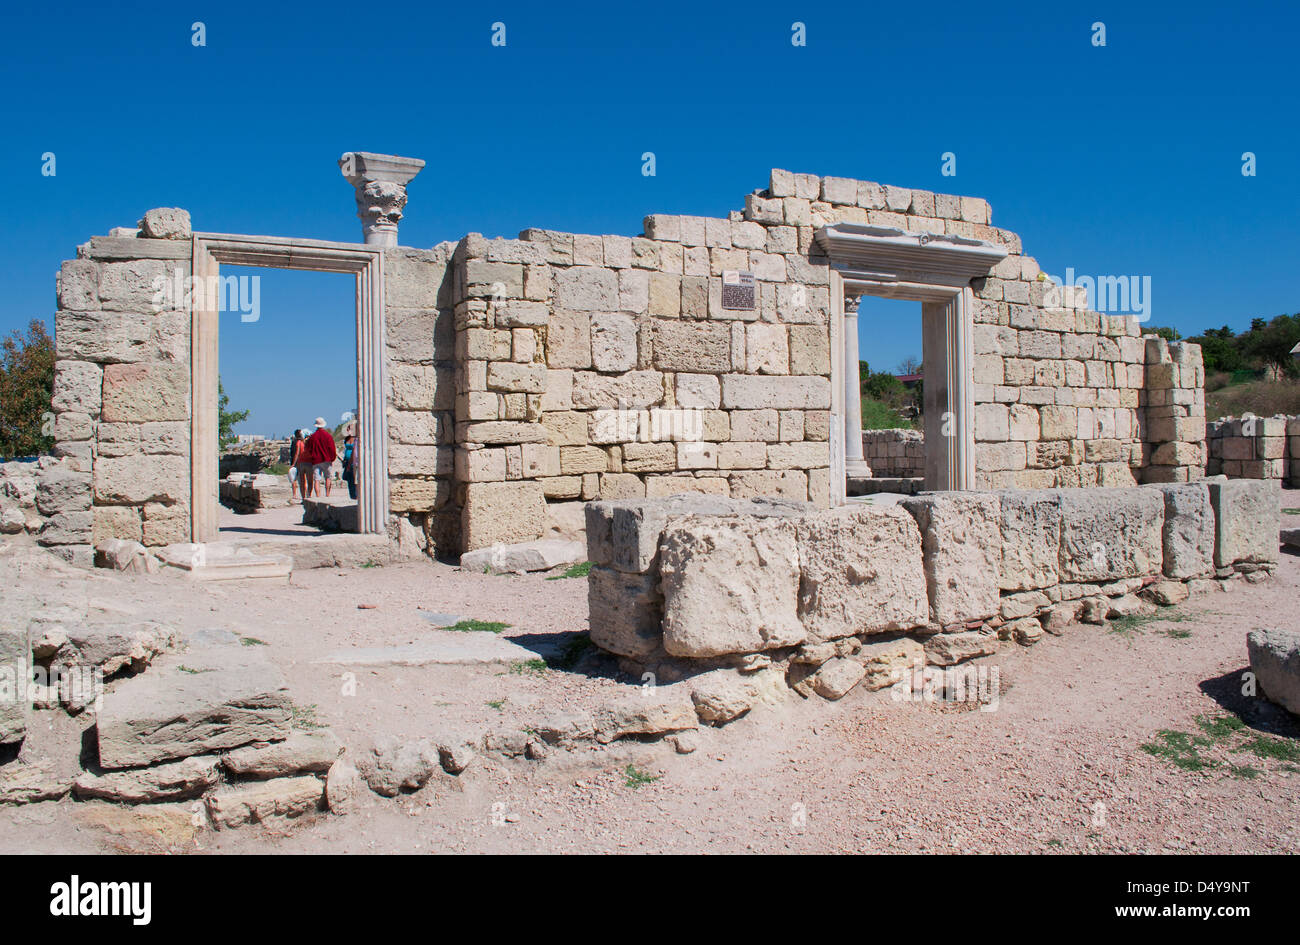 Ukraine, the Crimea, territory of Sevastopol - on September 3 2012 - the tourists walking on ruins of the old city of Chersonese Stock Photo